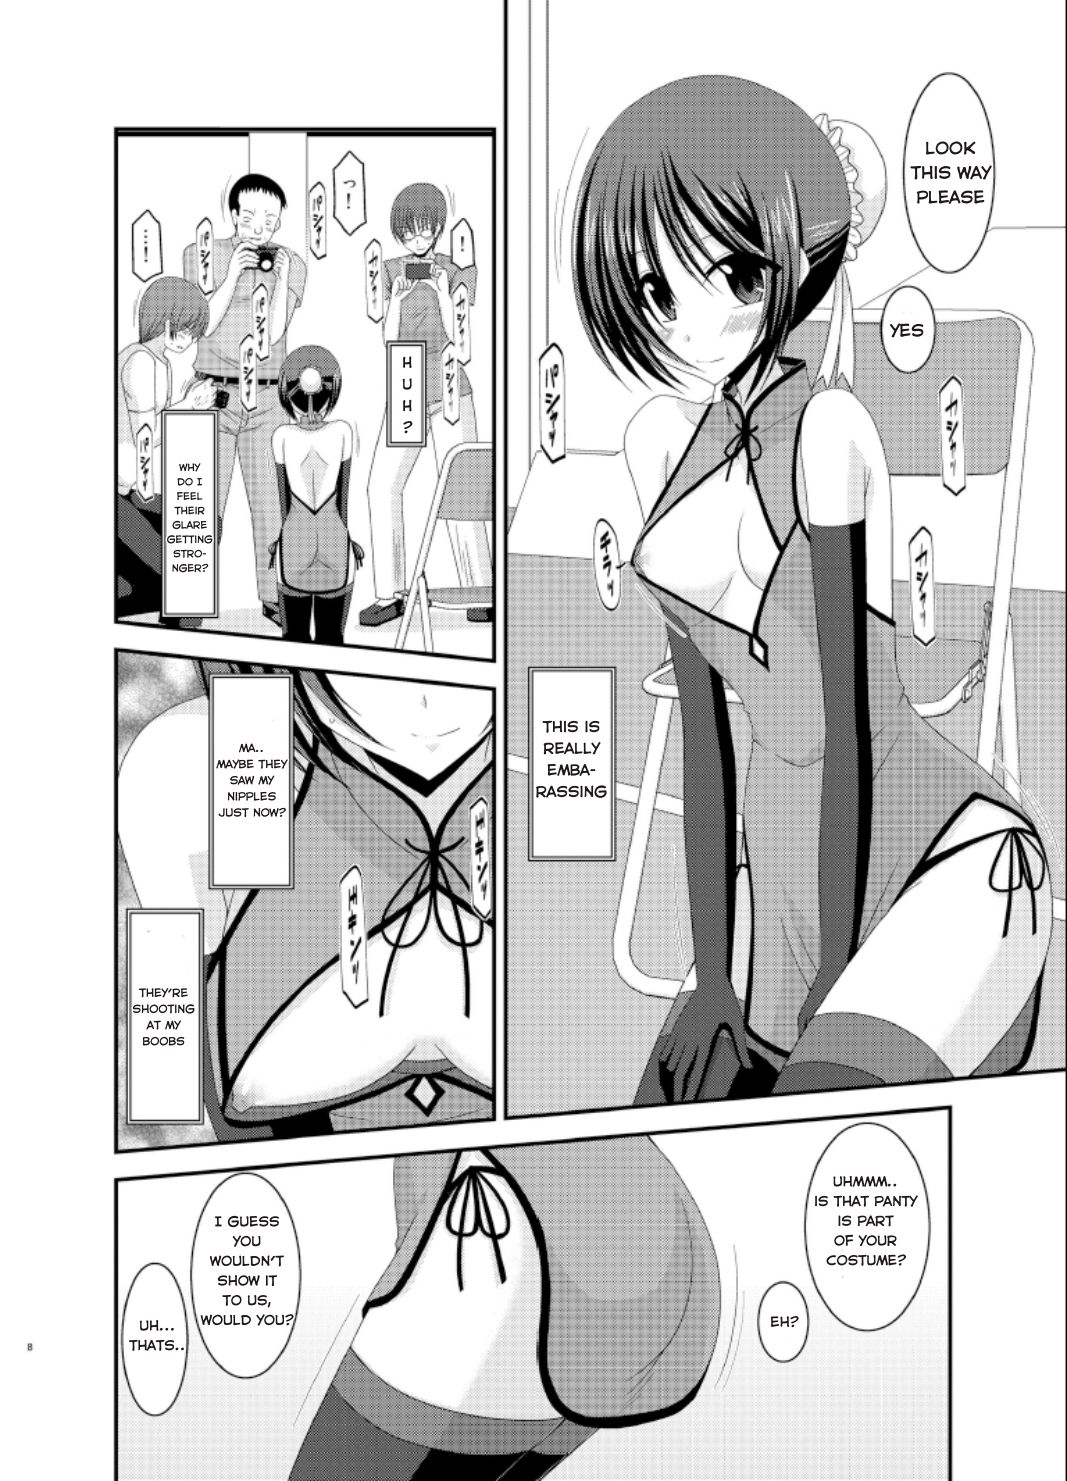 [valssu] Exhibitionist Girl_s Play Extra Chapter cosplay part [hong_mei_ling] [Tomoya] page 5 full